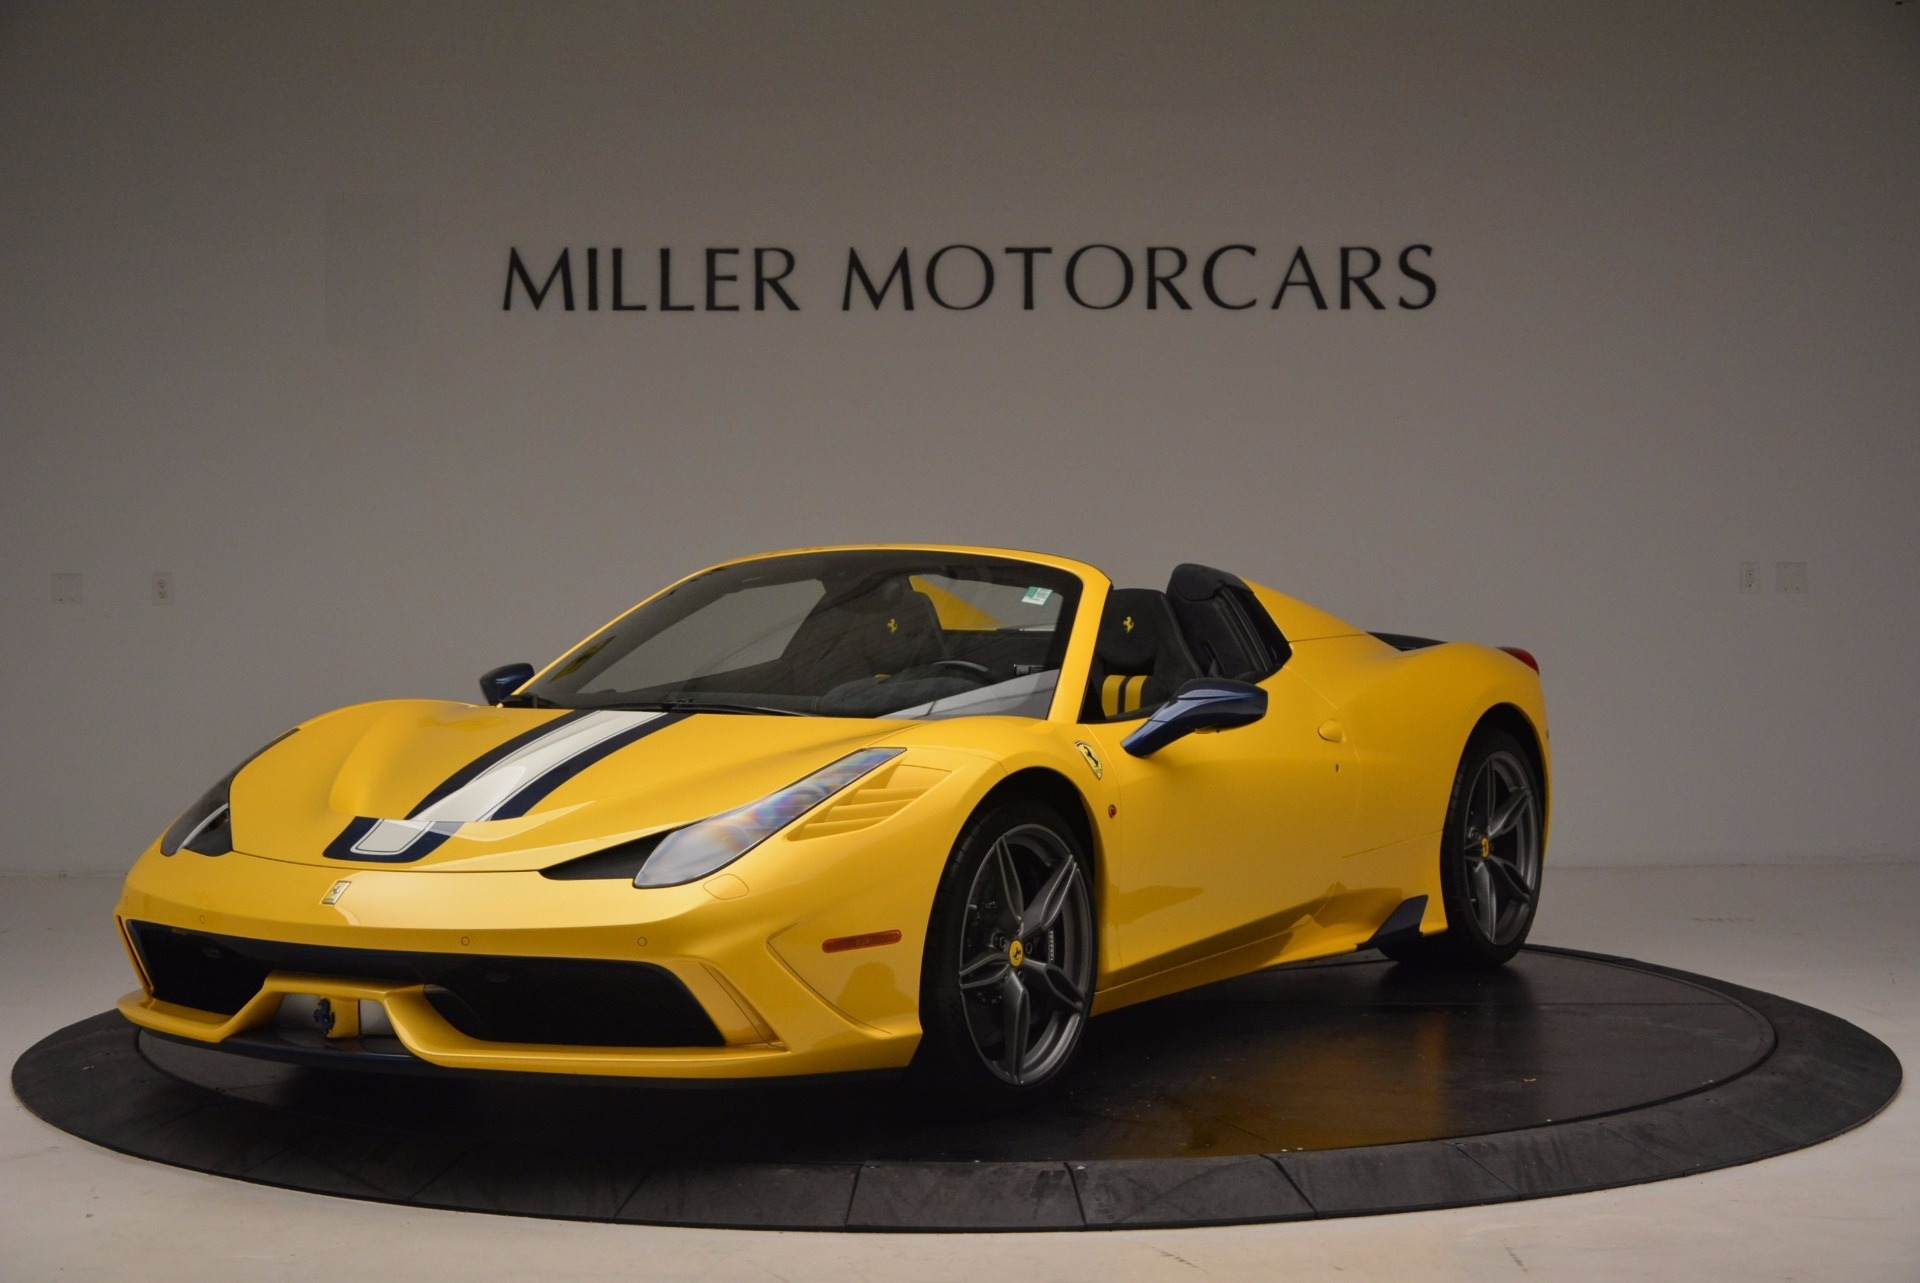 Used 2015 Ferrari 458 Speciale Aperta for sale Sold at Rolls-Royce Motor Cars Greenwich in Greenwich CT 06830 1